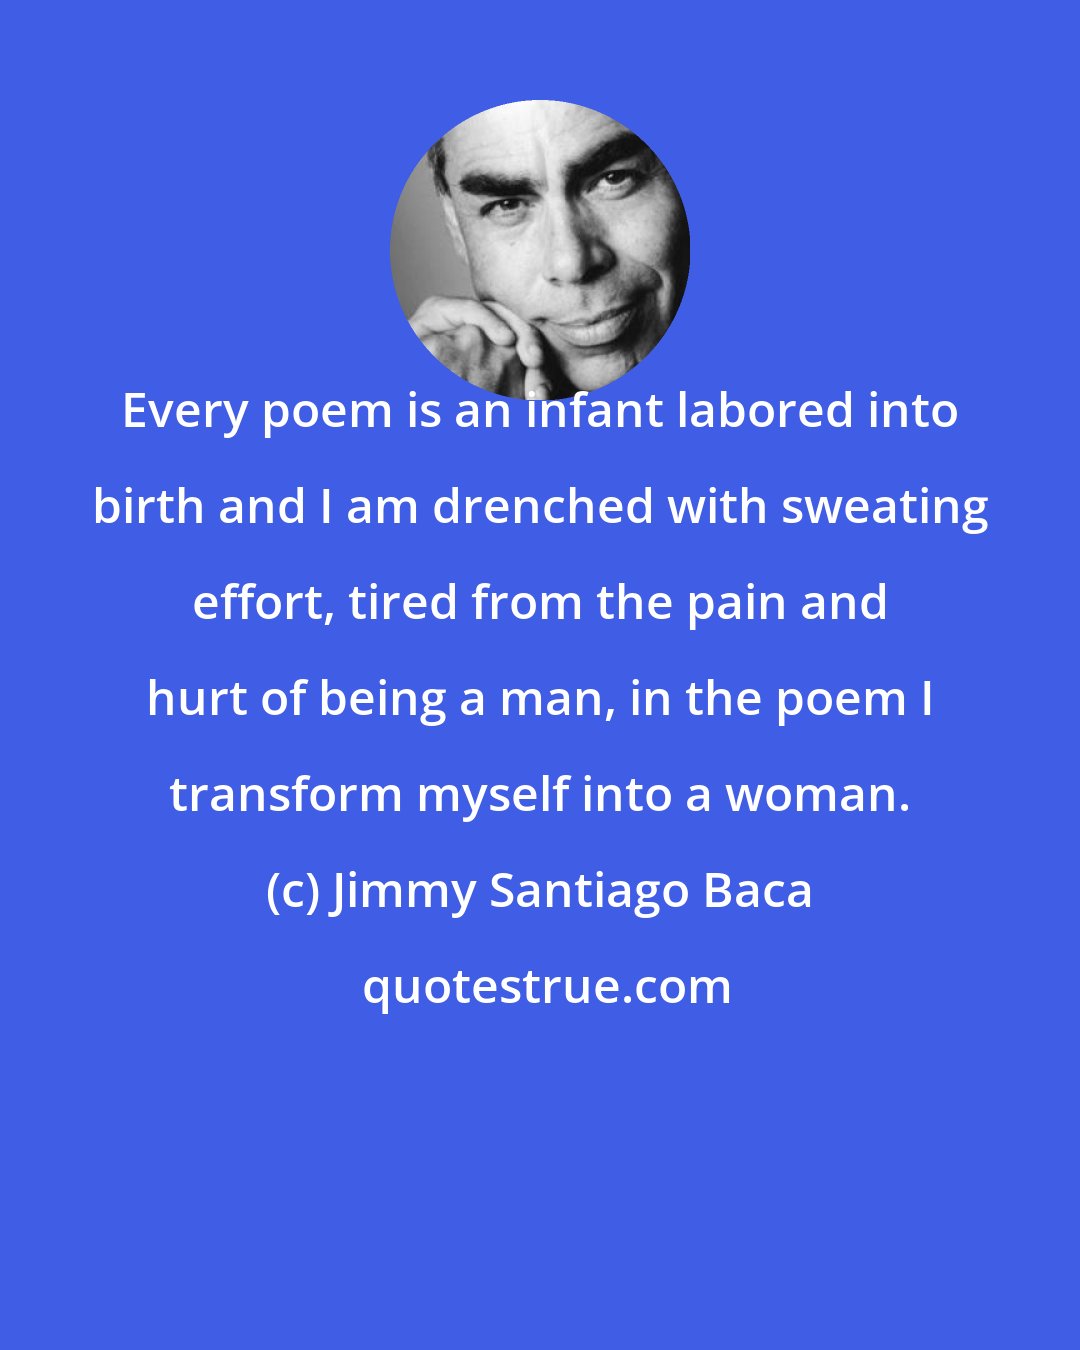 Jimmy Santiago Baca: Every poem is an infant labored into birth and I am drenched with sweating effort, tired from the pain and hurt of being a man, in the poem I transform myself into a woman.